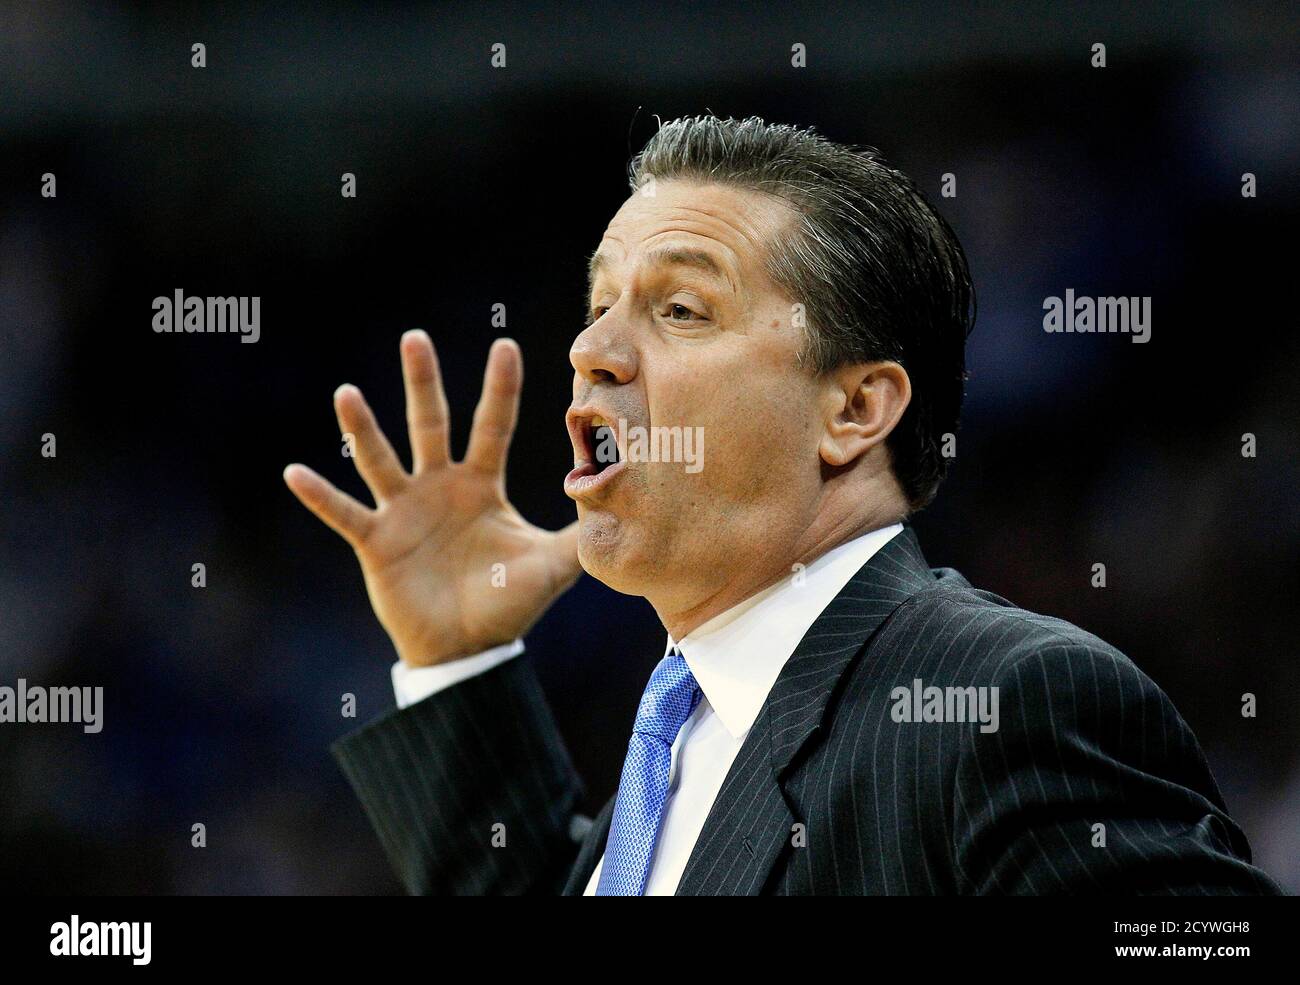 Kentucky Wildcats head coach John Calipari instructs his team as they take on the Vanderbilt Commodores during the finals of the SEC men's NCAA basketball tournament in New Orleans, Louisiana March 11, 2012. REUTERS/Jonathan Bachman (UNITED STATES - Tags: SPORT BASKETBALL) Stock Photo